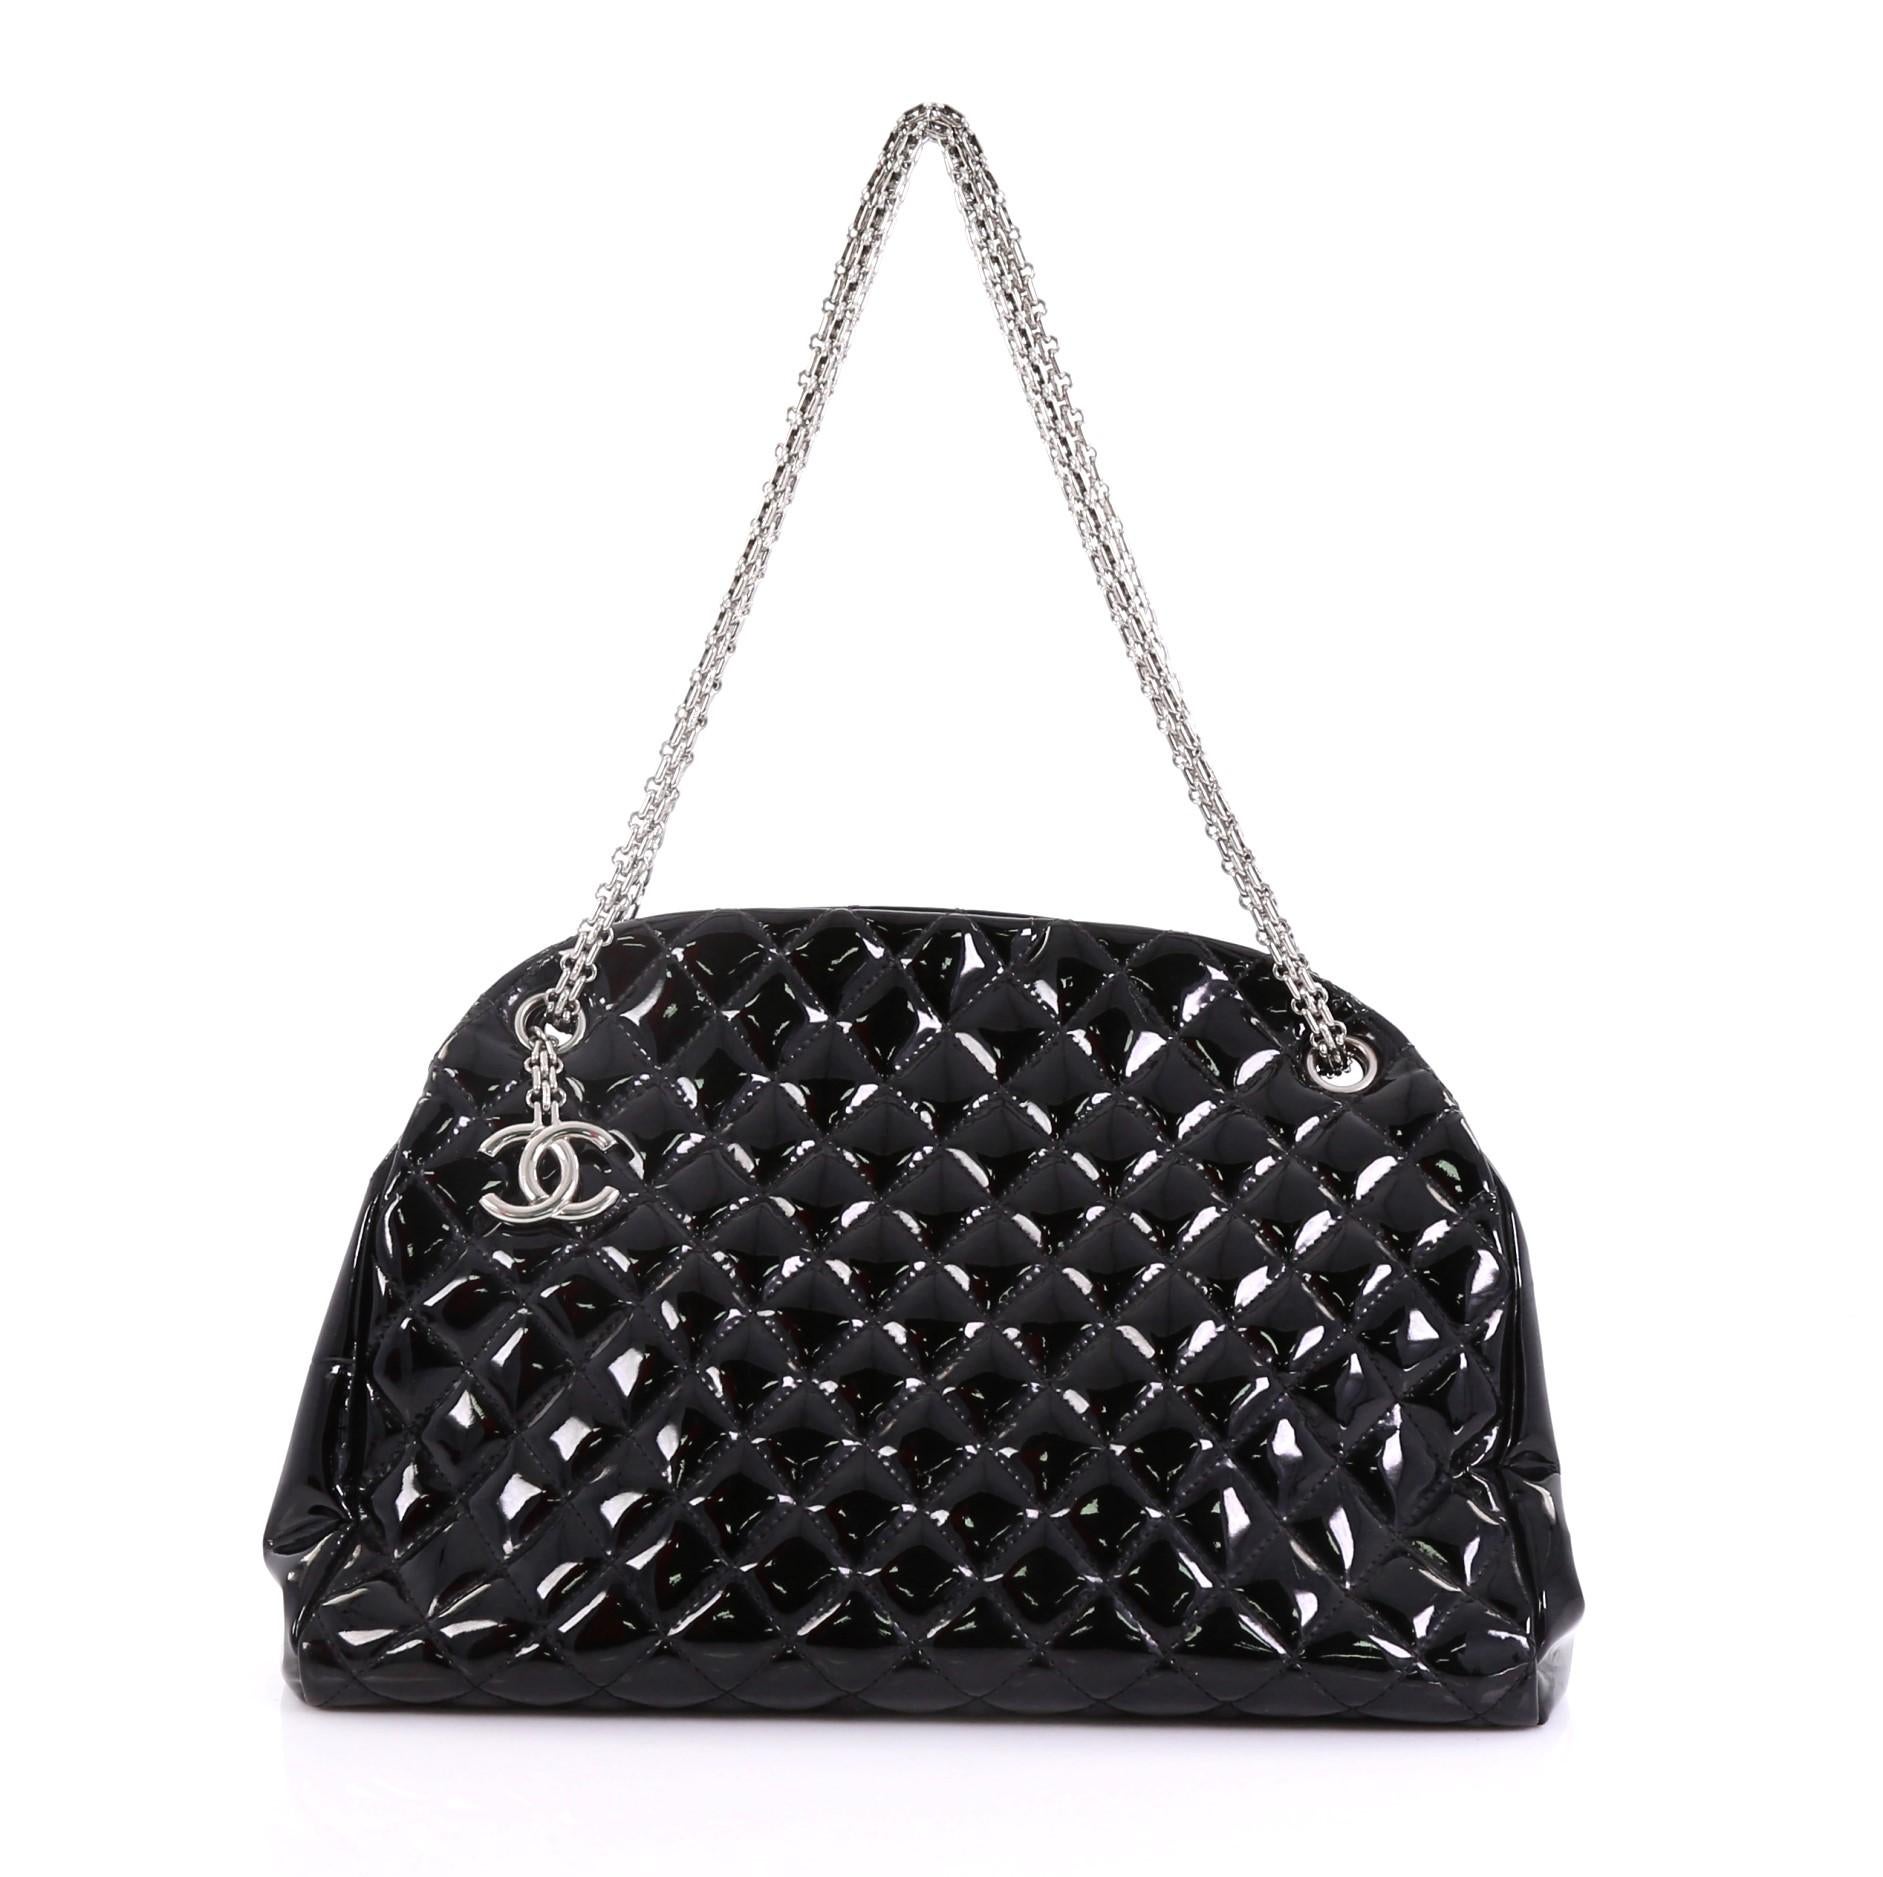 This Chanel Just Mademoiselle Handbag Quilted Patent Large, crafted from black quilted patent leather, features reissue chain straps, and silver-tone hardware. It opens to a burgundy fabric interior with two side compartments and a middle zip